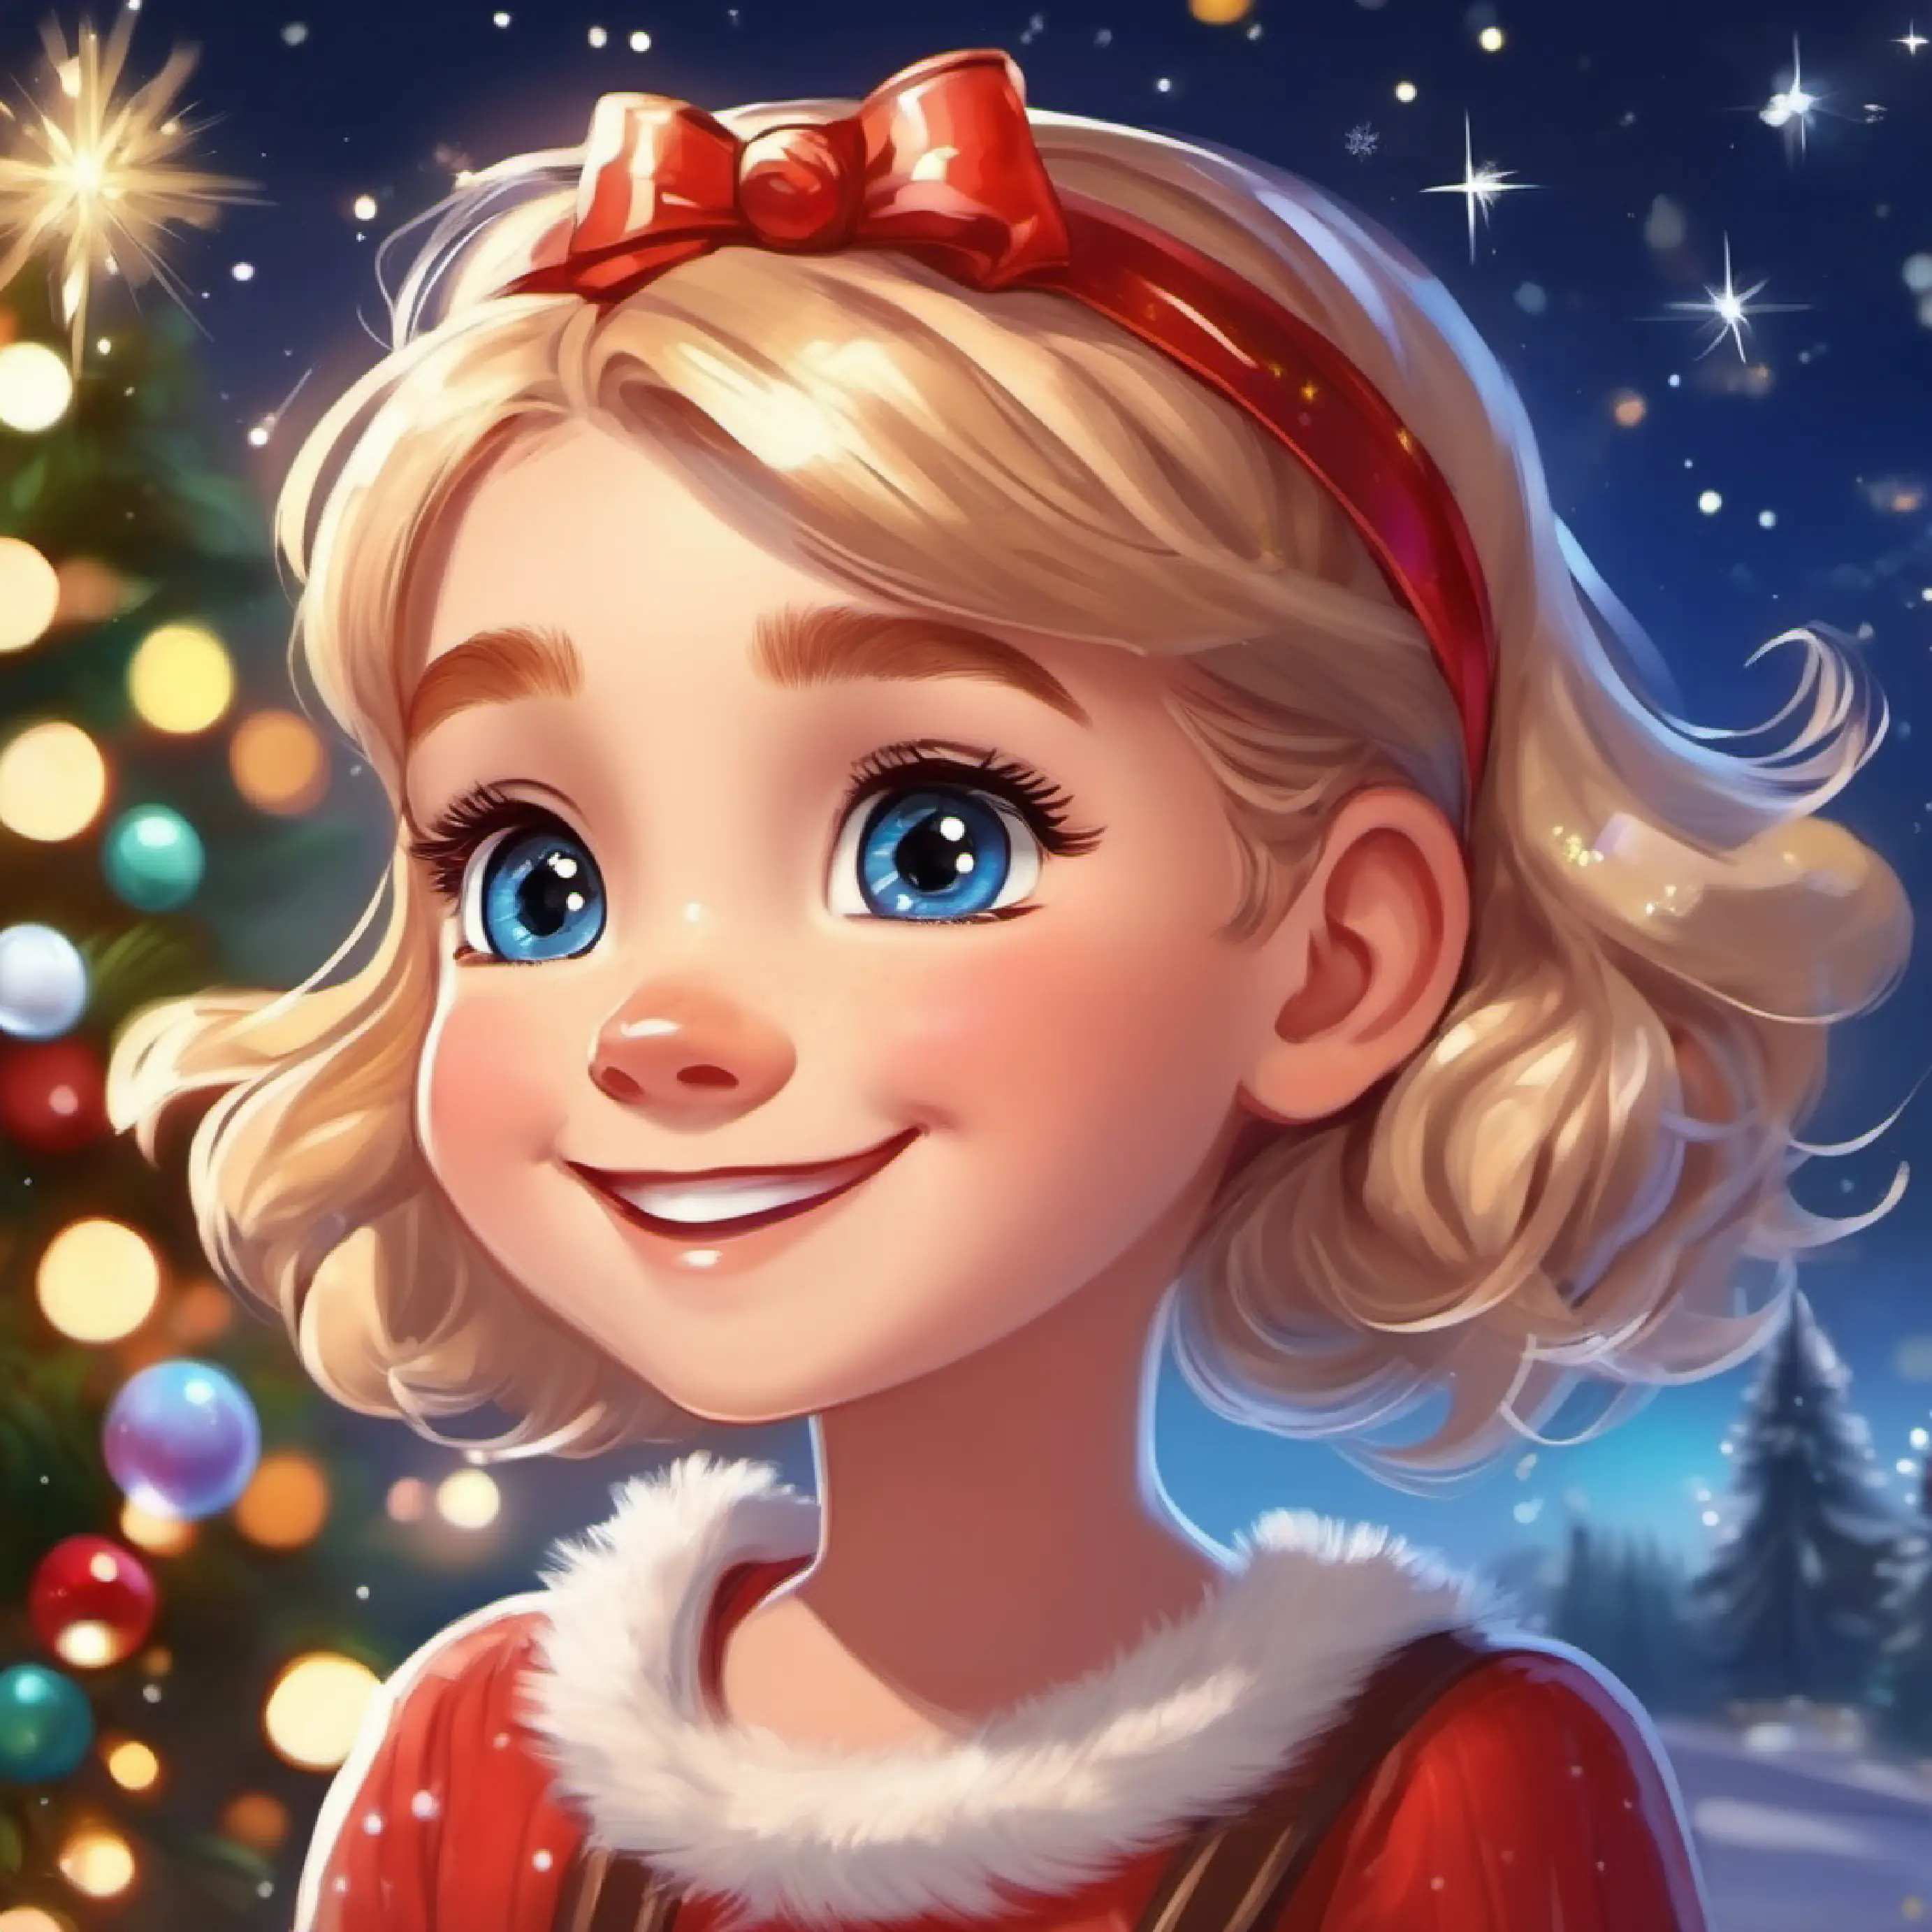 Introduces Cheerful girl, blonde hair, blue eyes, loves sparkles and her sparkly headband, friendship with Enthusiastic girl, brown hair, brown eyes, always smiling